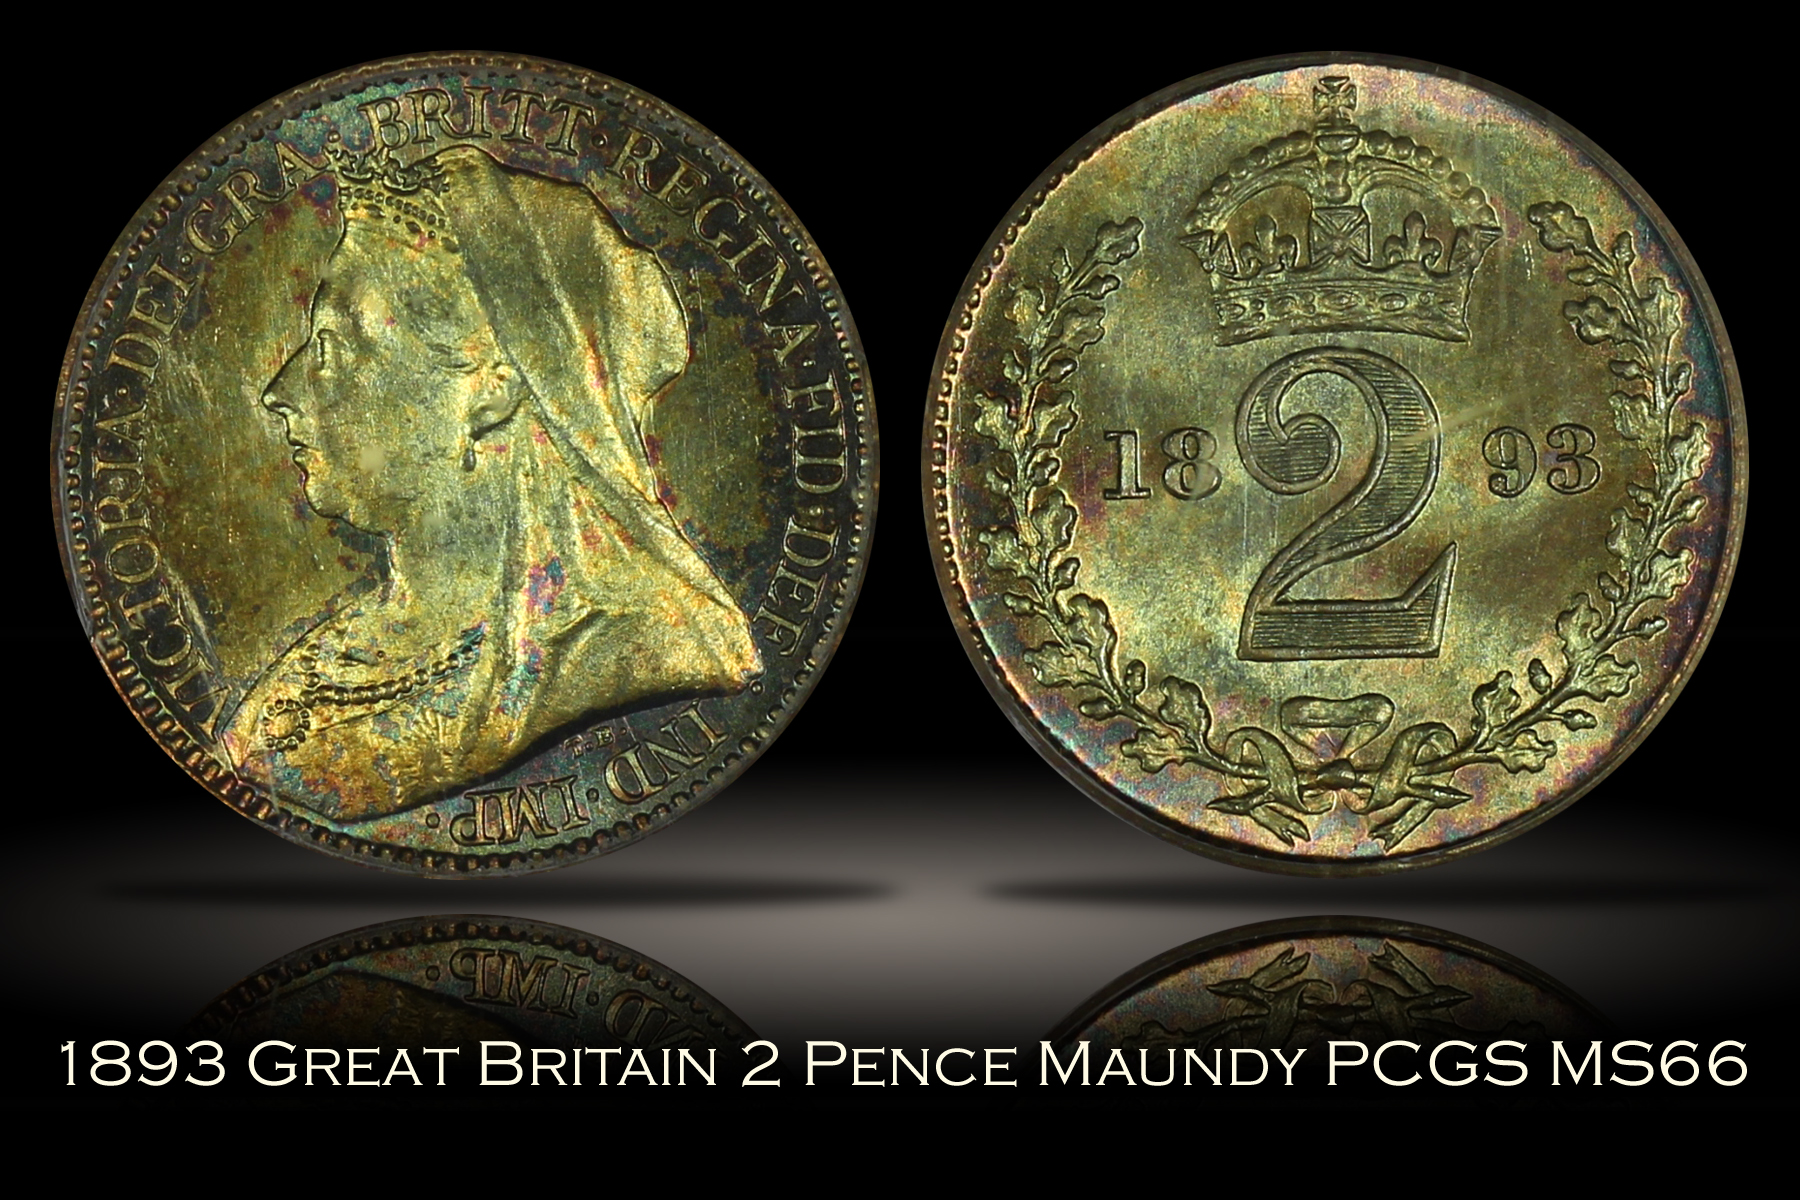 1893 Great Britain 2 Pence Maundy PCGS MS66